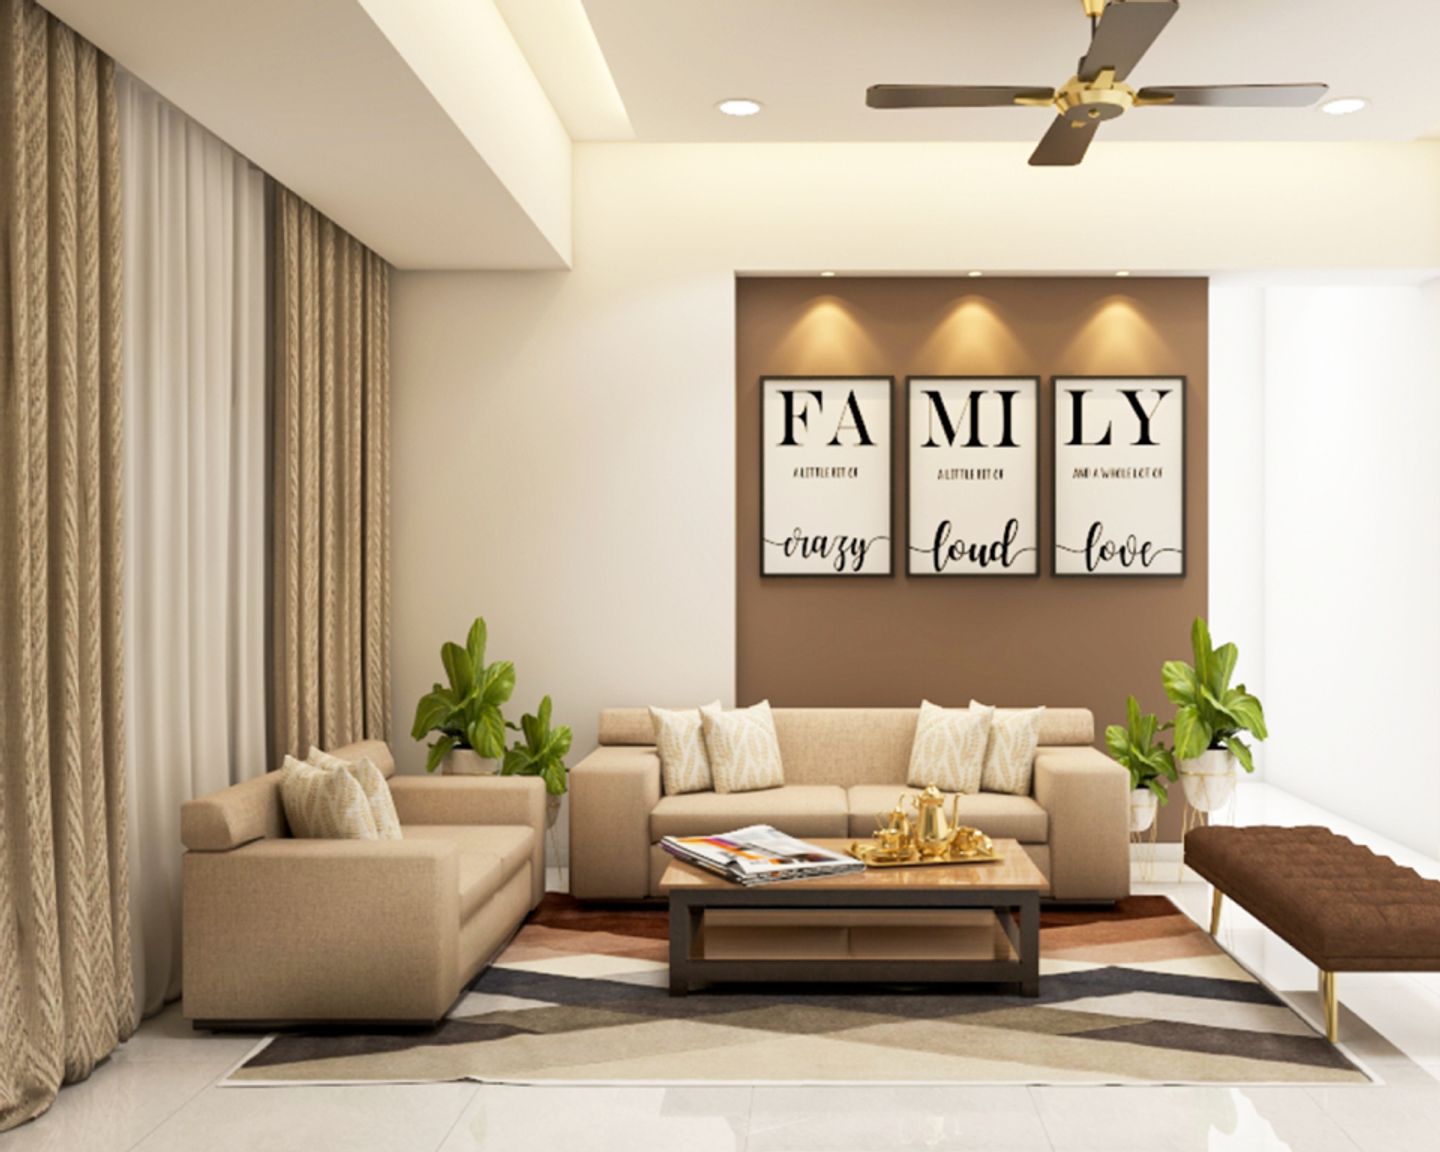 White And Brown Living Room Wall Design - Livspace